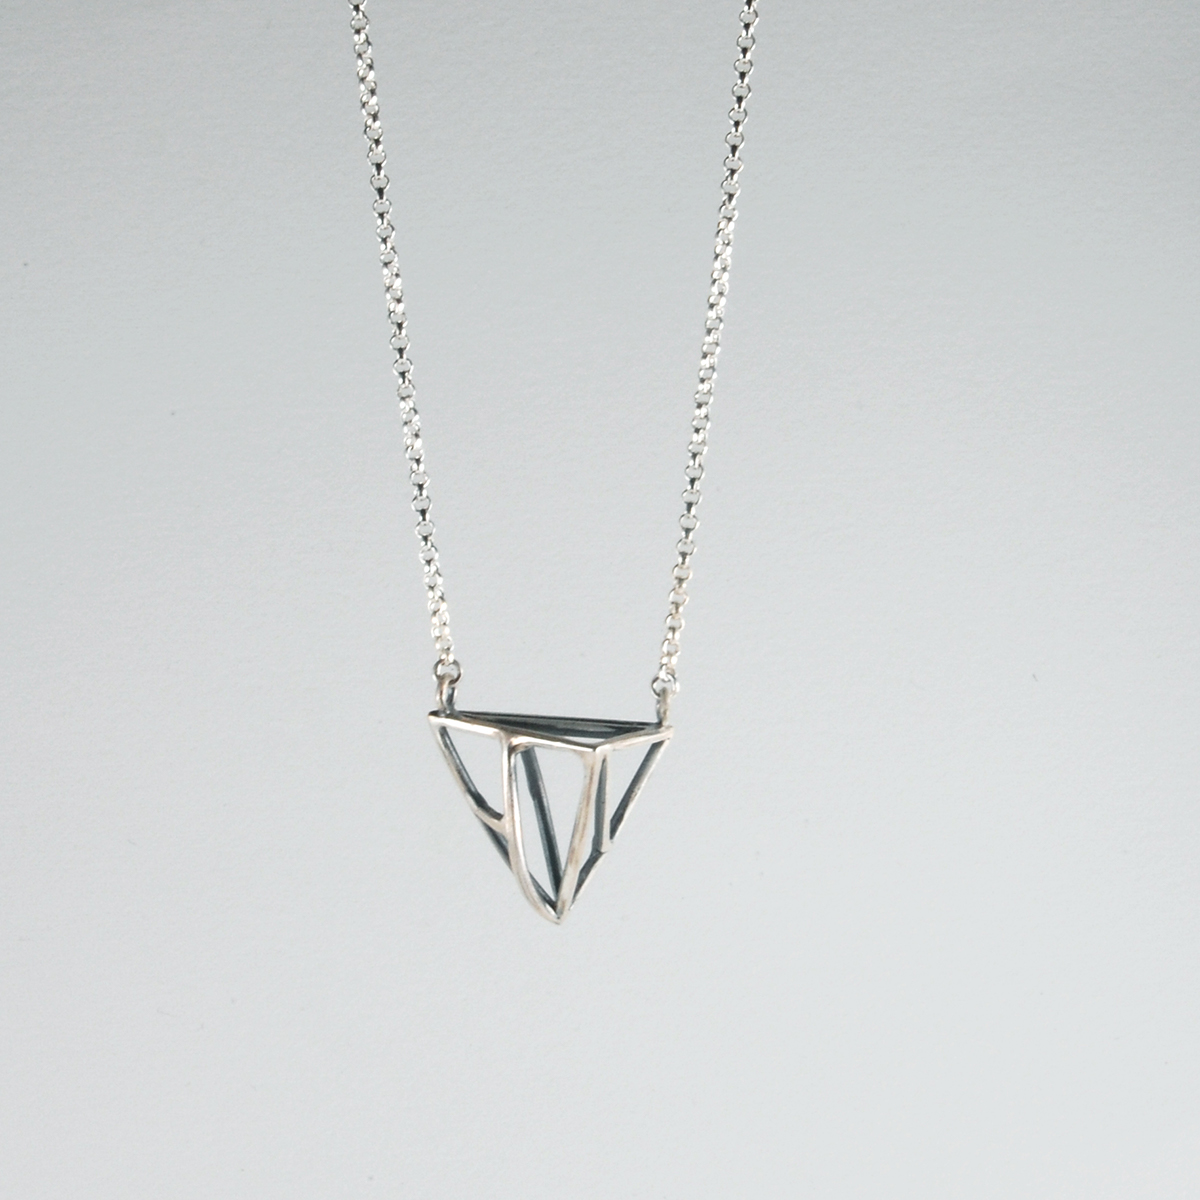 geometry sculpture lost wax casting Investment sterling silver Necklace